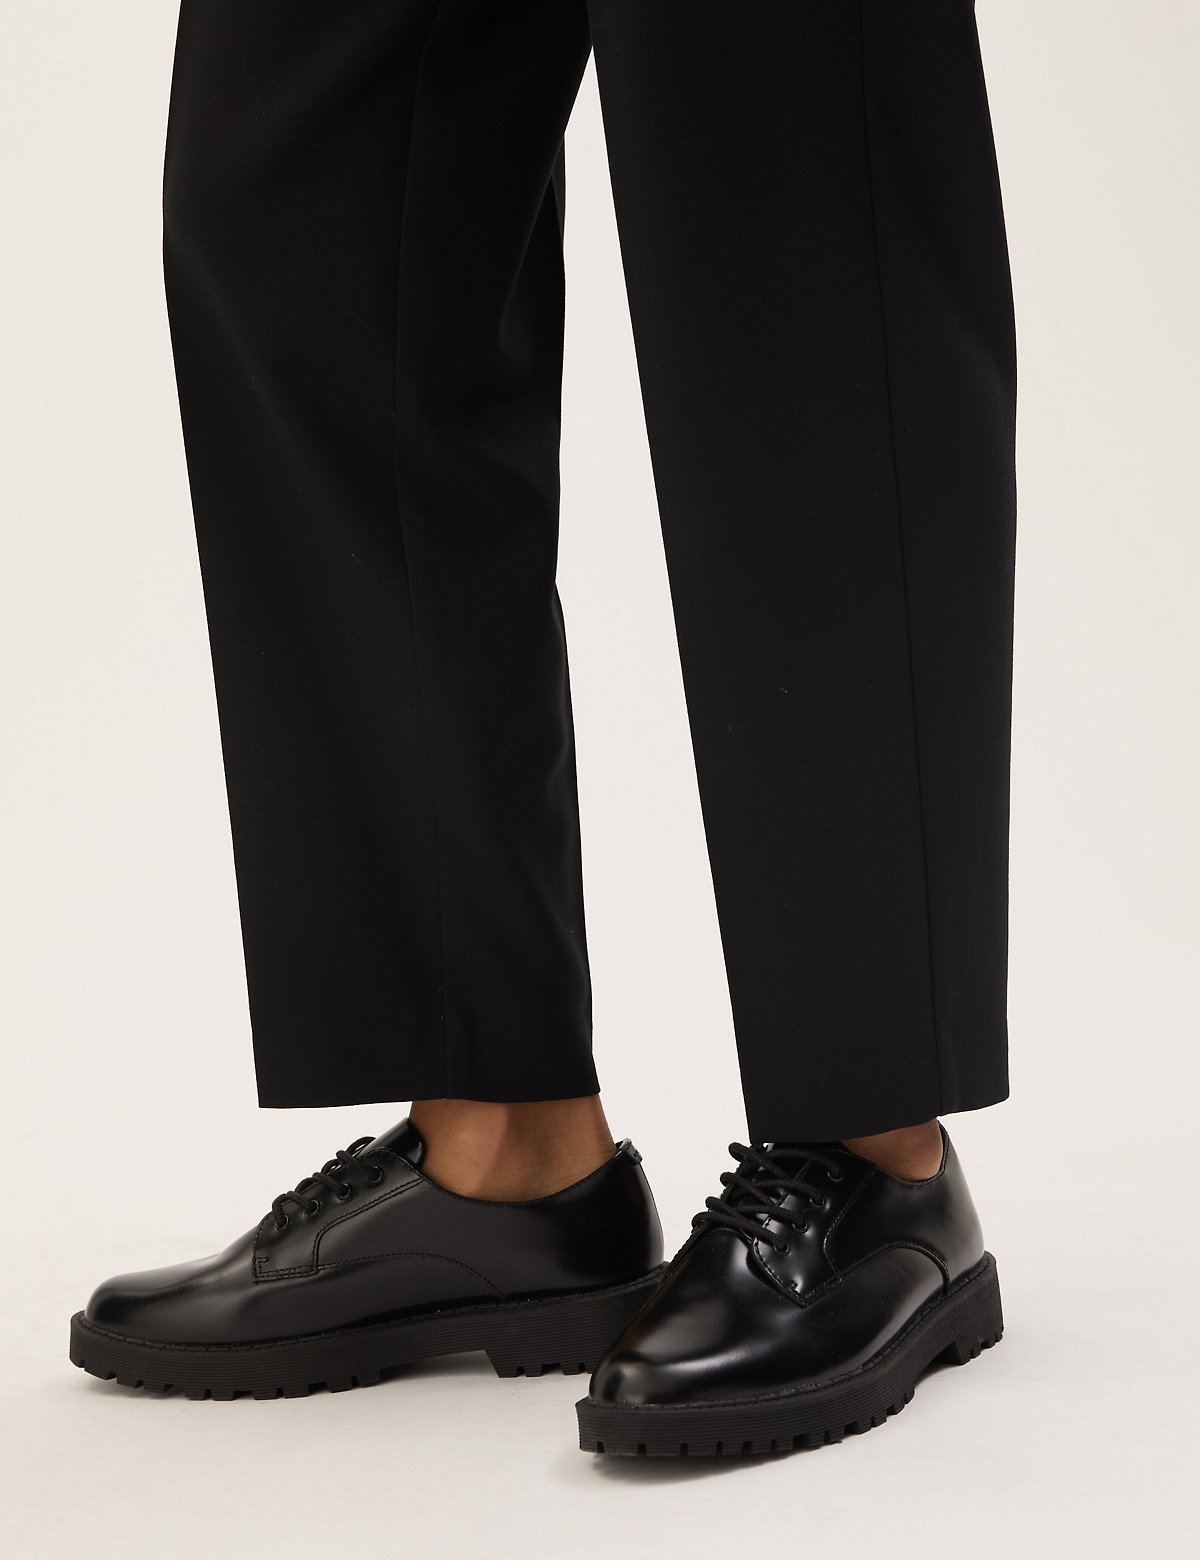 Woven Pleated Ankle Grazer Trousers